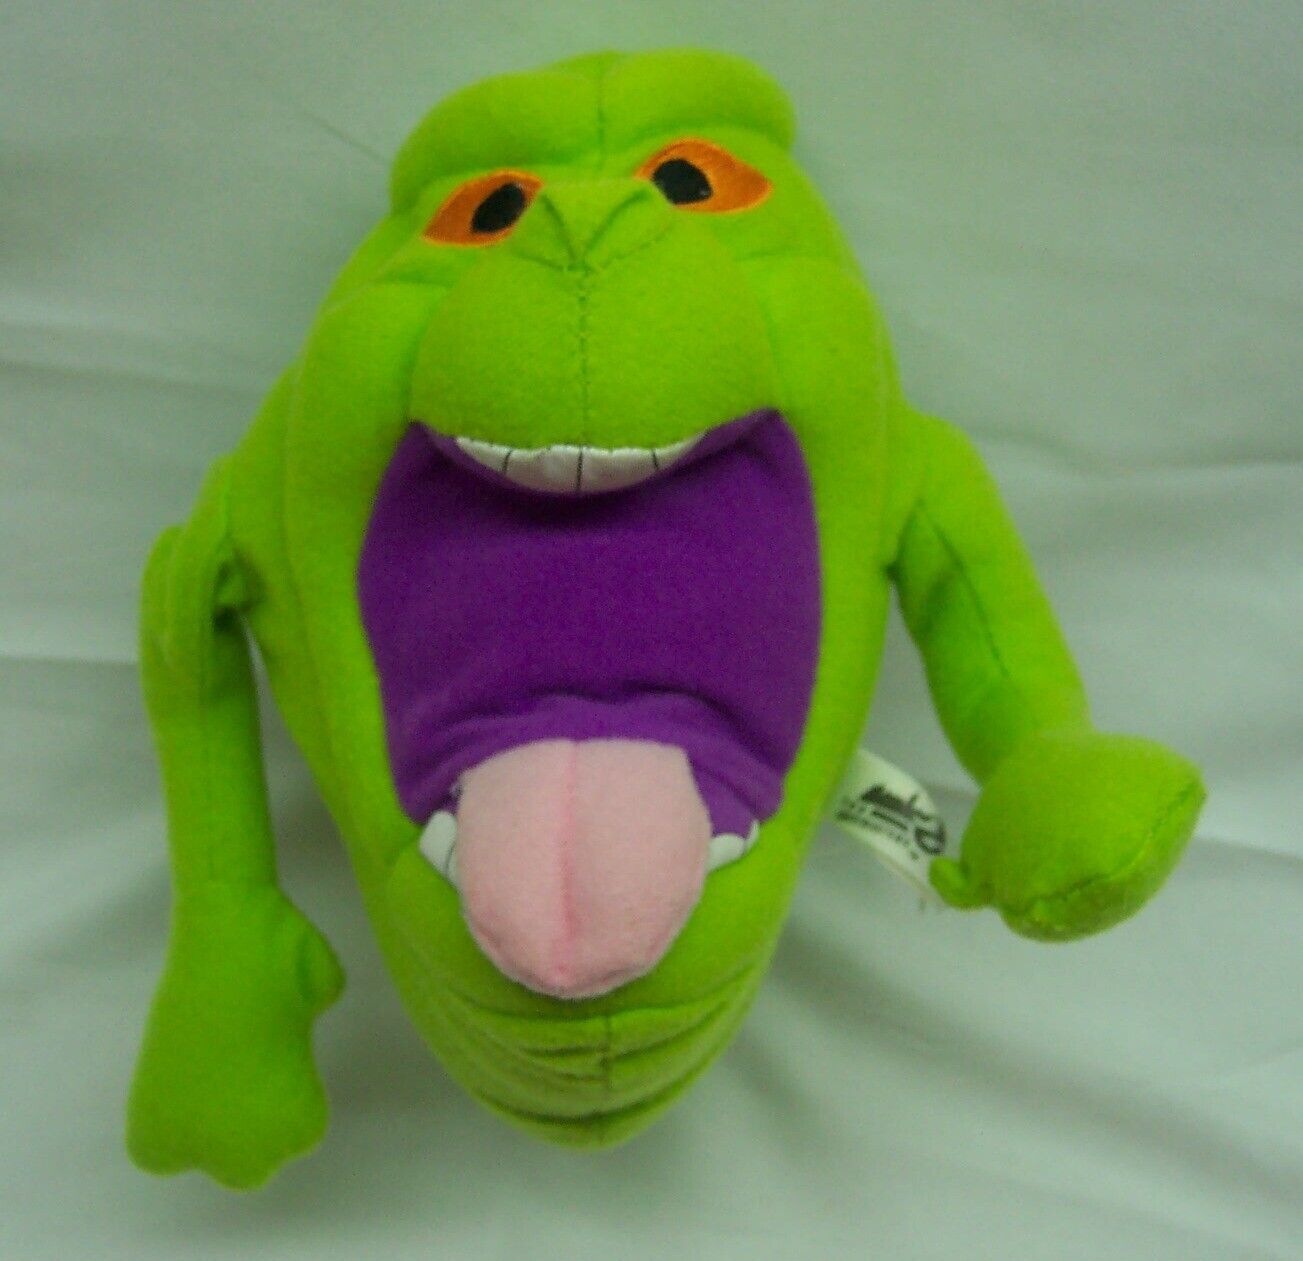 Primary image for GHOSTBUSTERS SLIMER THE GREEN GHOST 9" Plush STUFFED ANIMAL Toy  2011